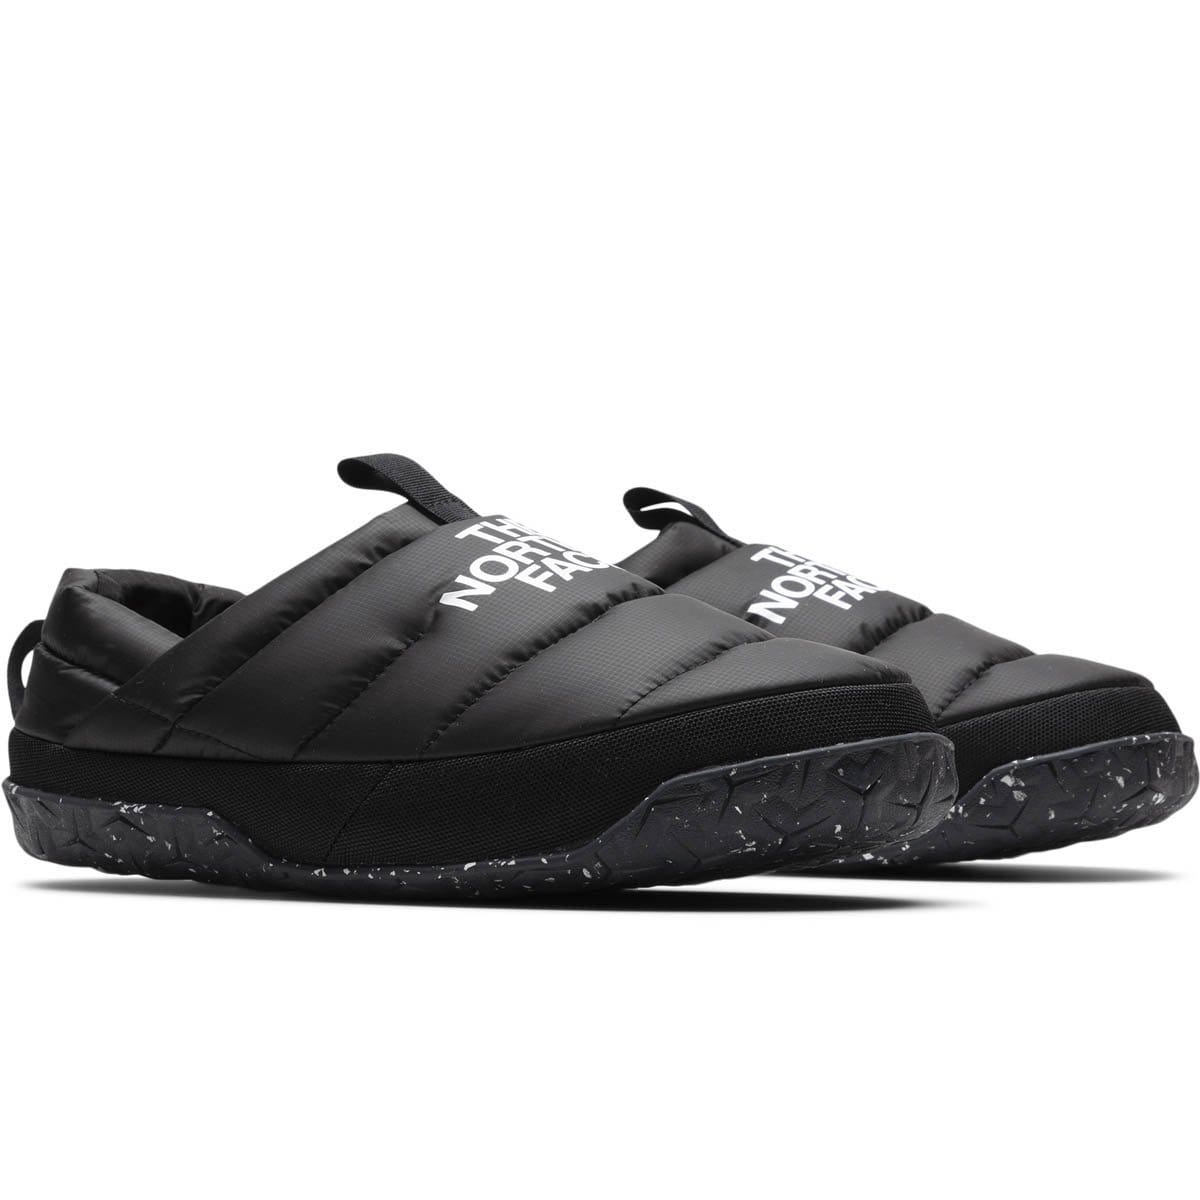 The North Face Casual Nuptse Mule Slippers